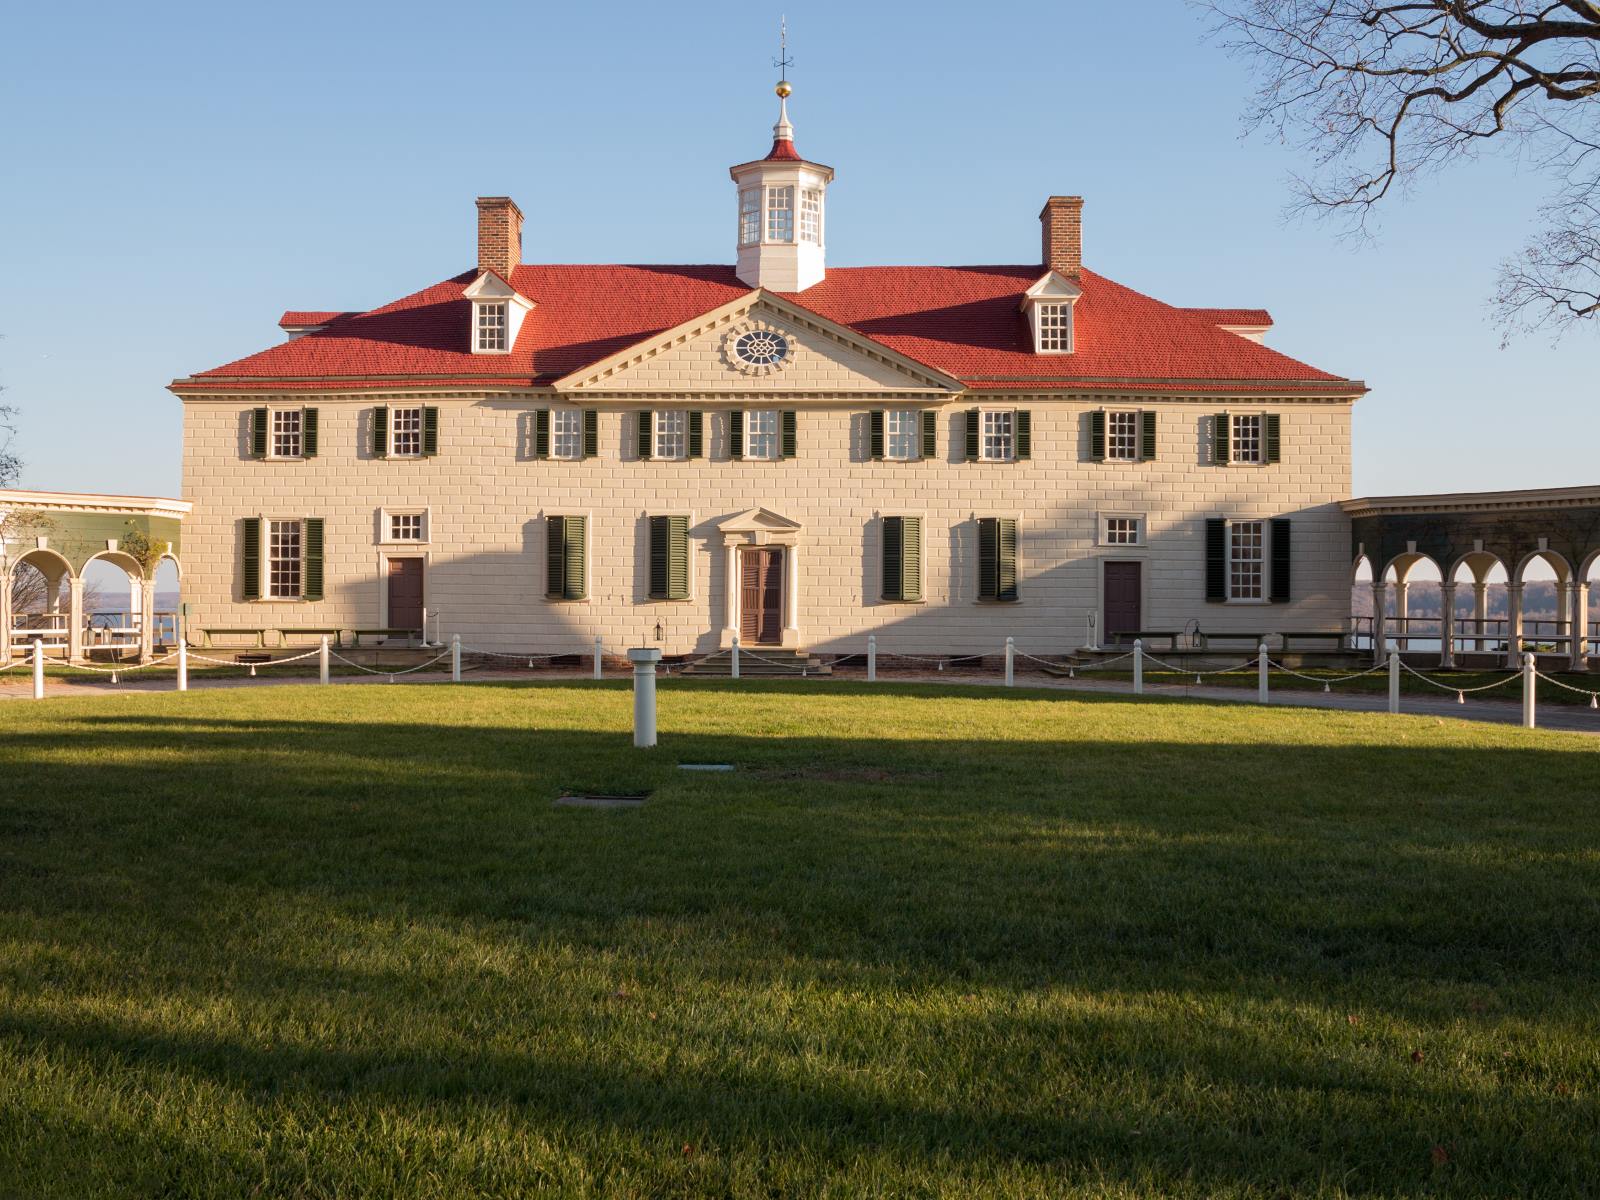 How Did George Washington Design The House He Lived In During Most Of His Presidency?